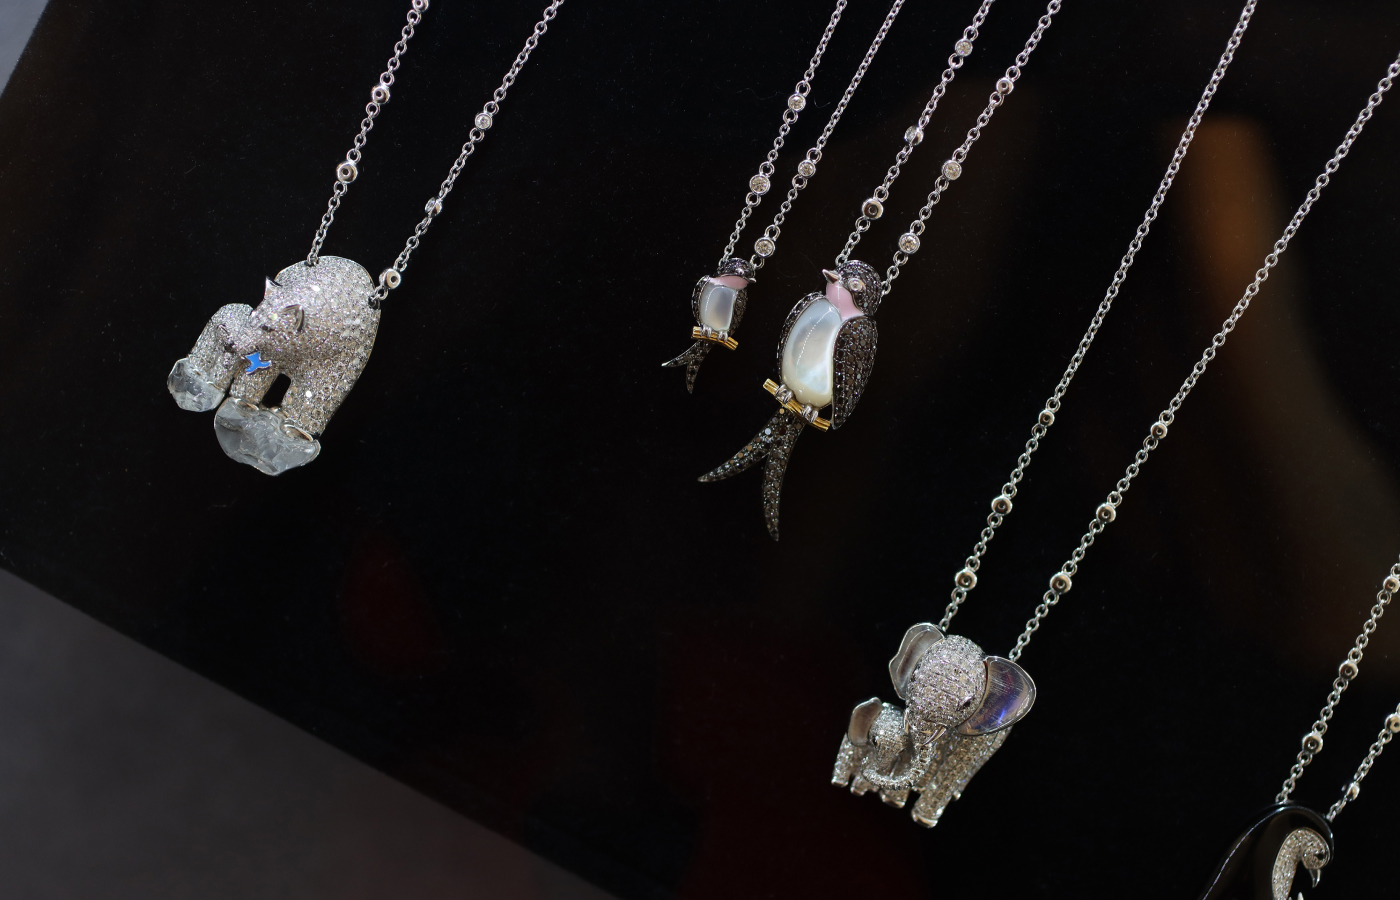 Necklaces from the Serendipity Jewelry My Little One collection, inspired by the maternal love of animals